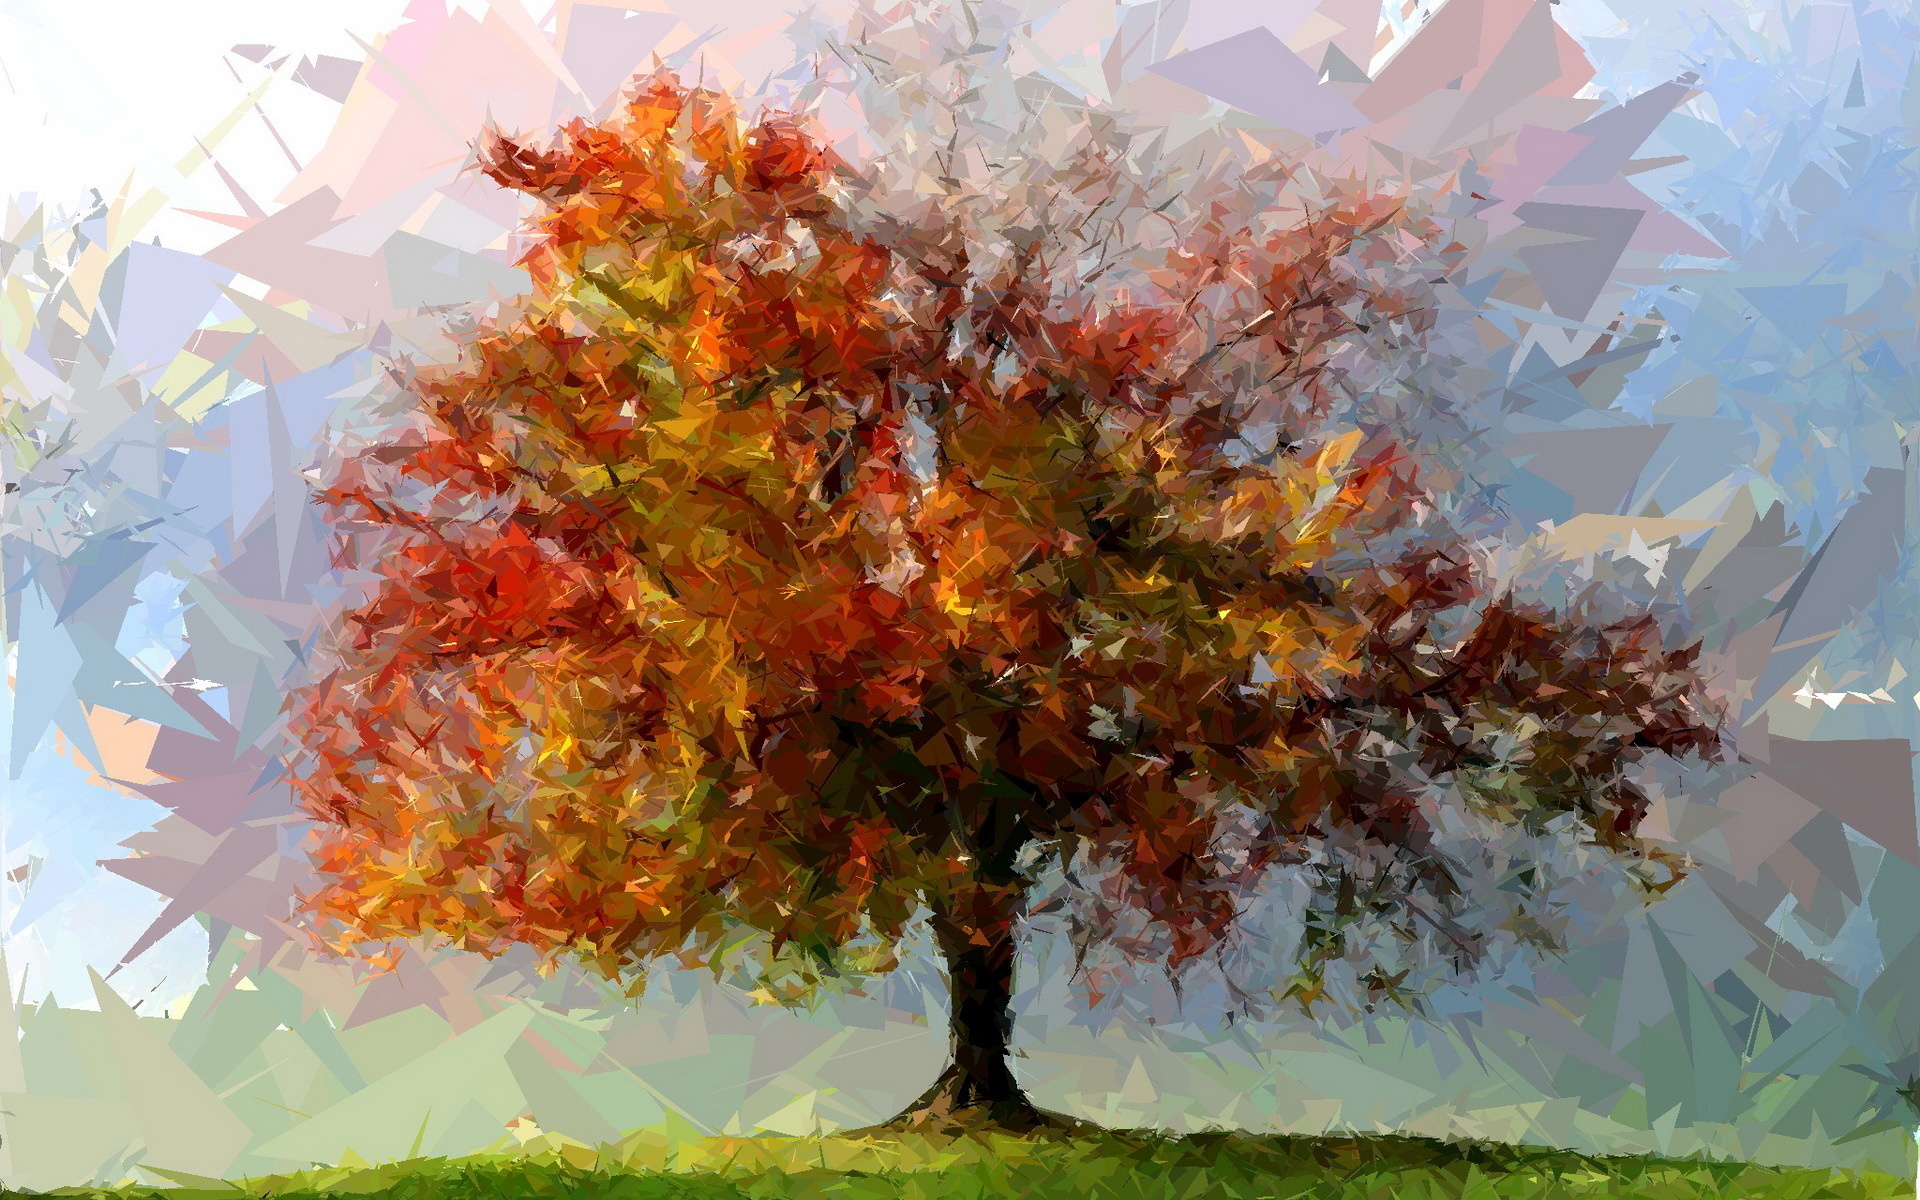 painting, Tree, Art, Abstract, Fotosketcher, Shattered, Autumn Wallpaper